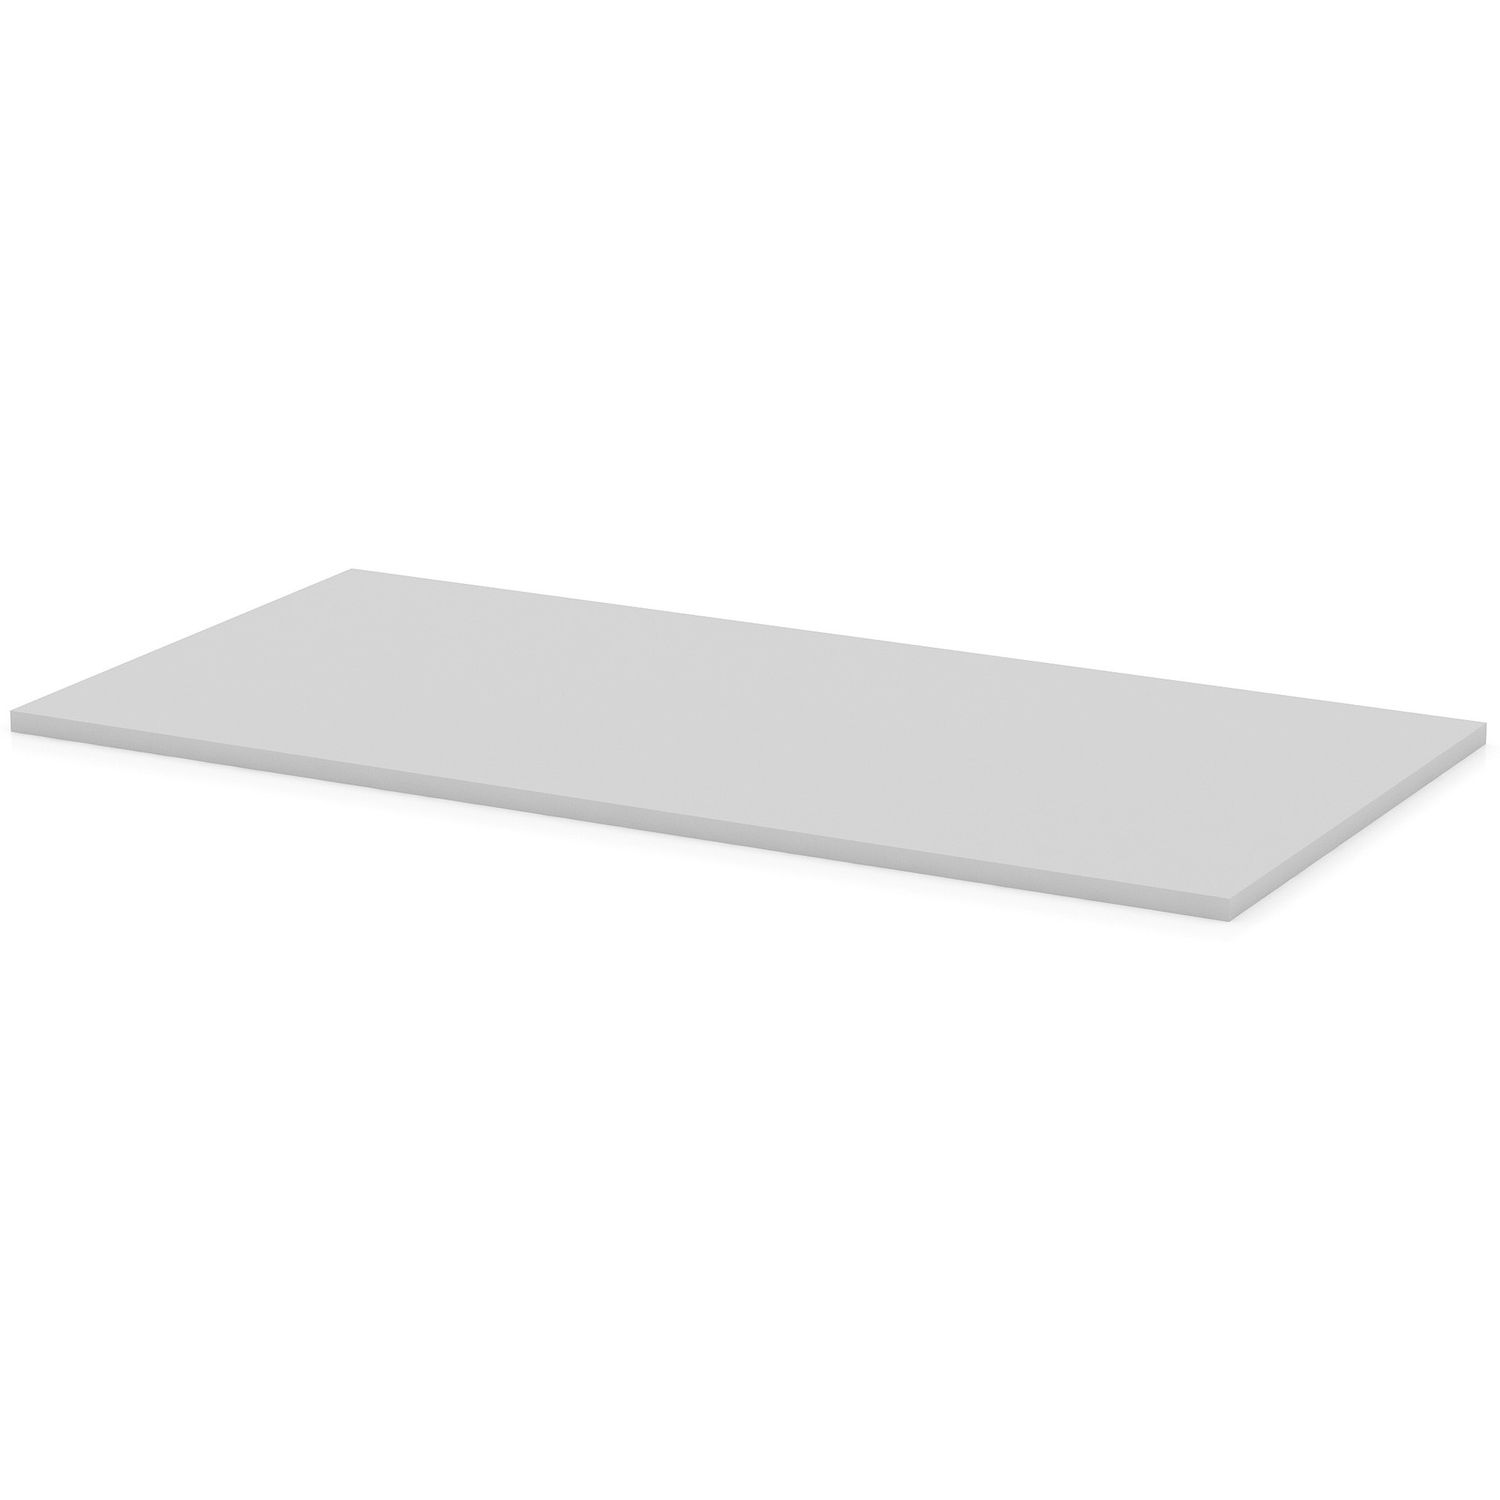 Width-Adjustable Training Table Top Gray Rectangle Top, 60" Table Top Length x 30" Table Top Width x 1" Table Top Thickness, Assembly Required